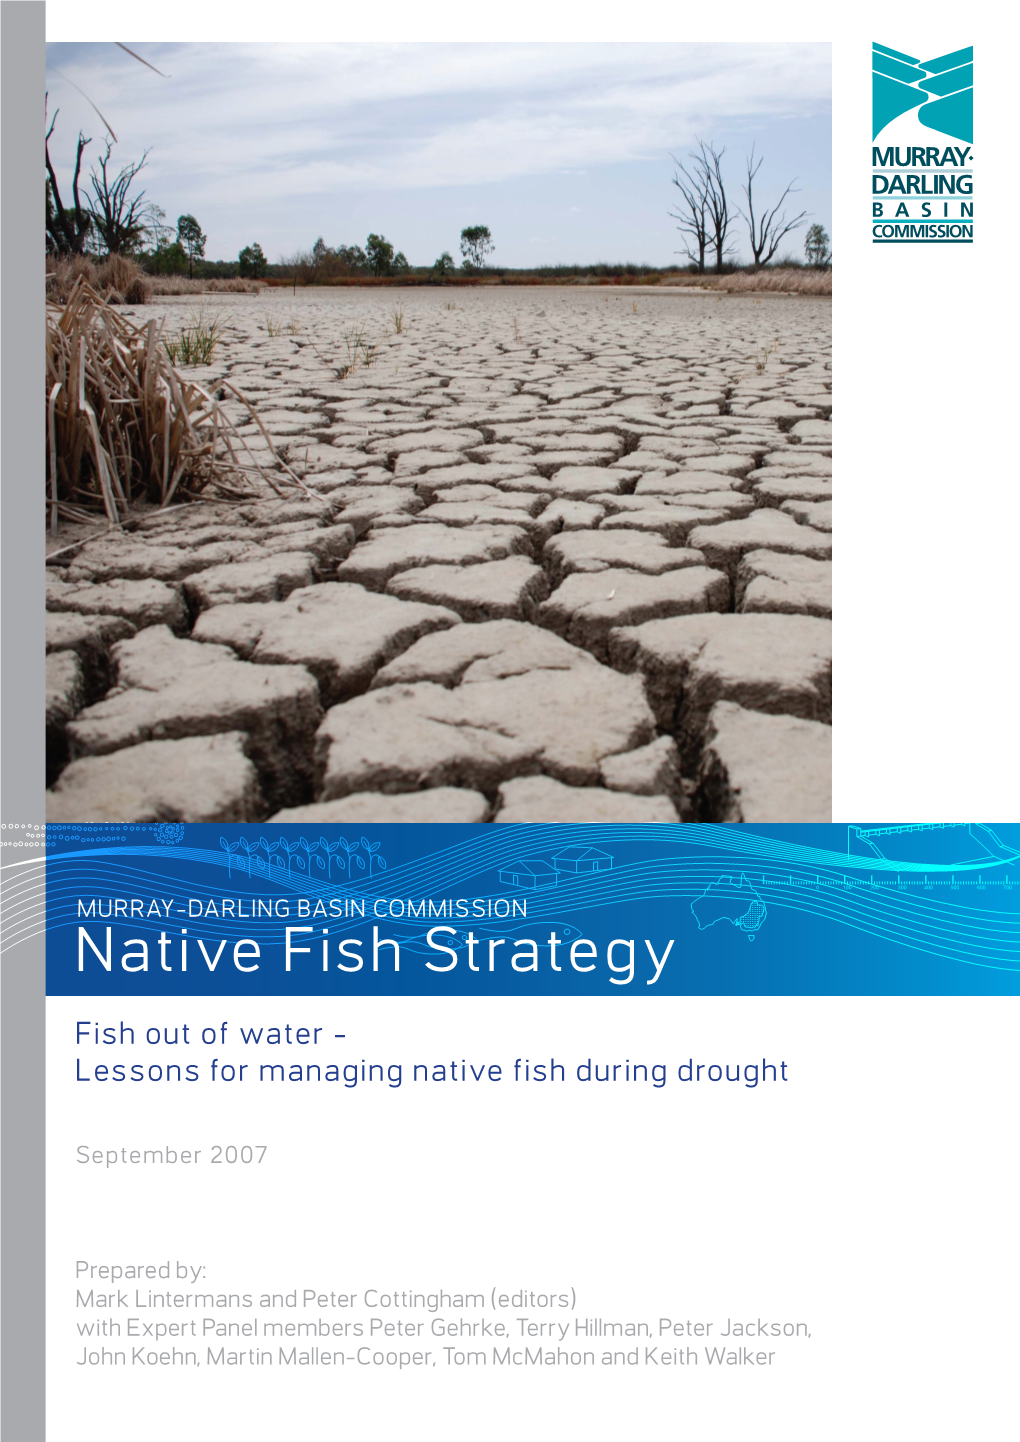 Lessons for Managing Native Fish During Drought